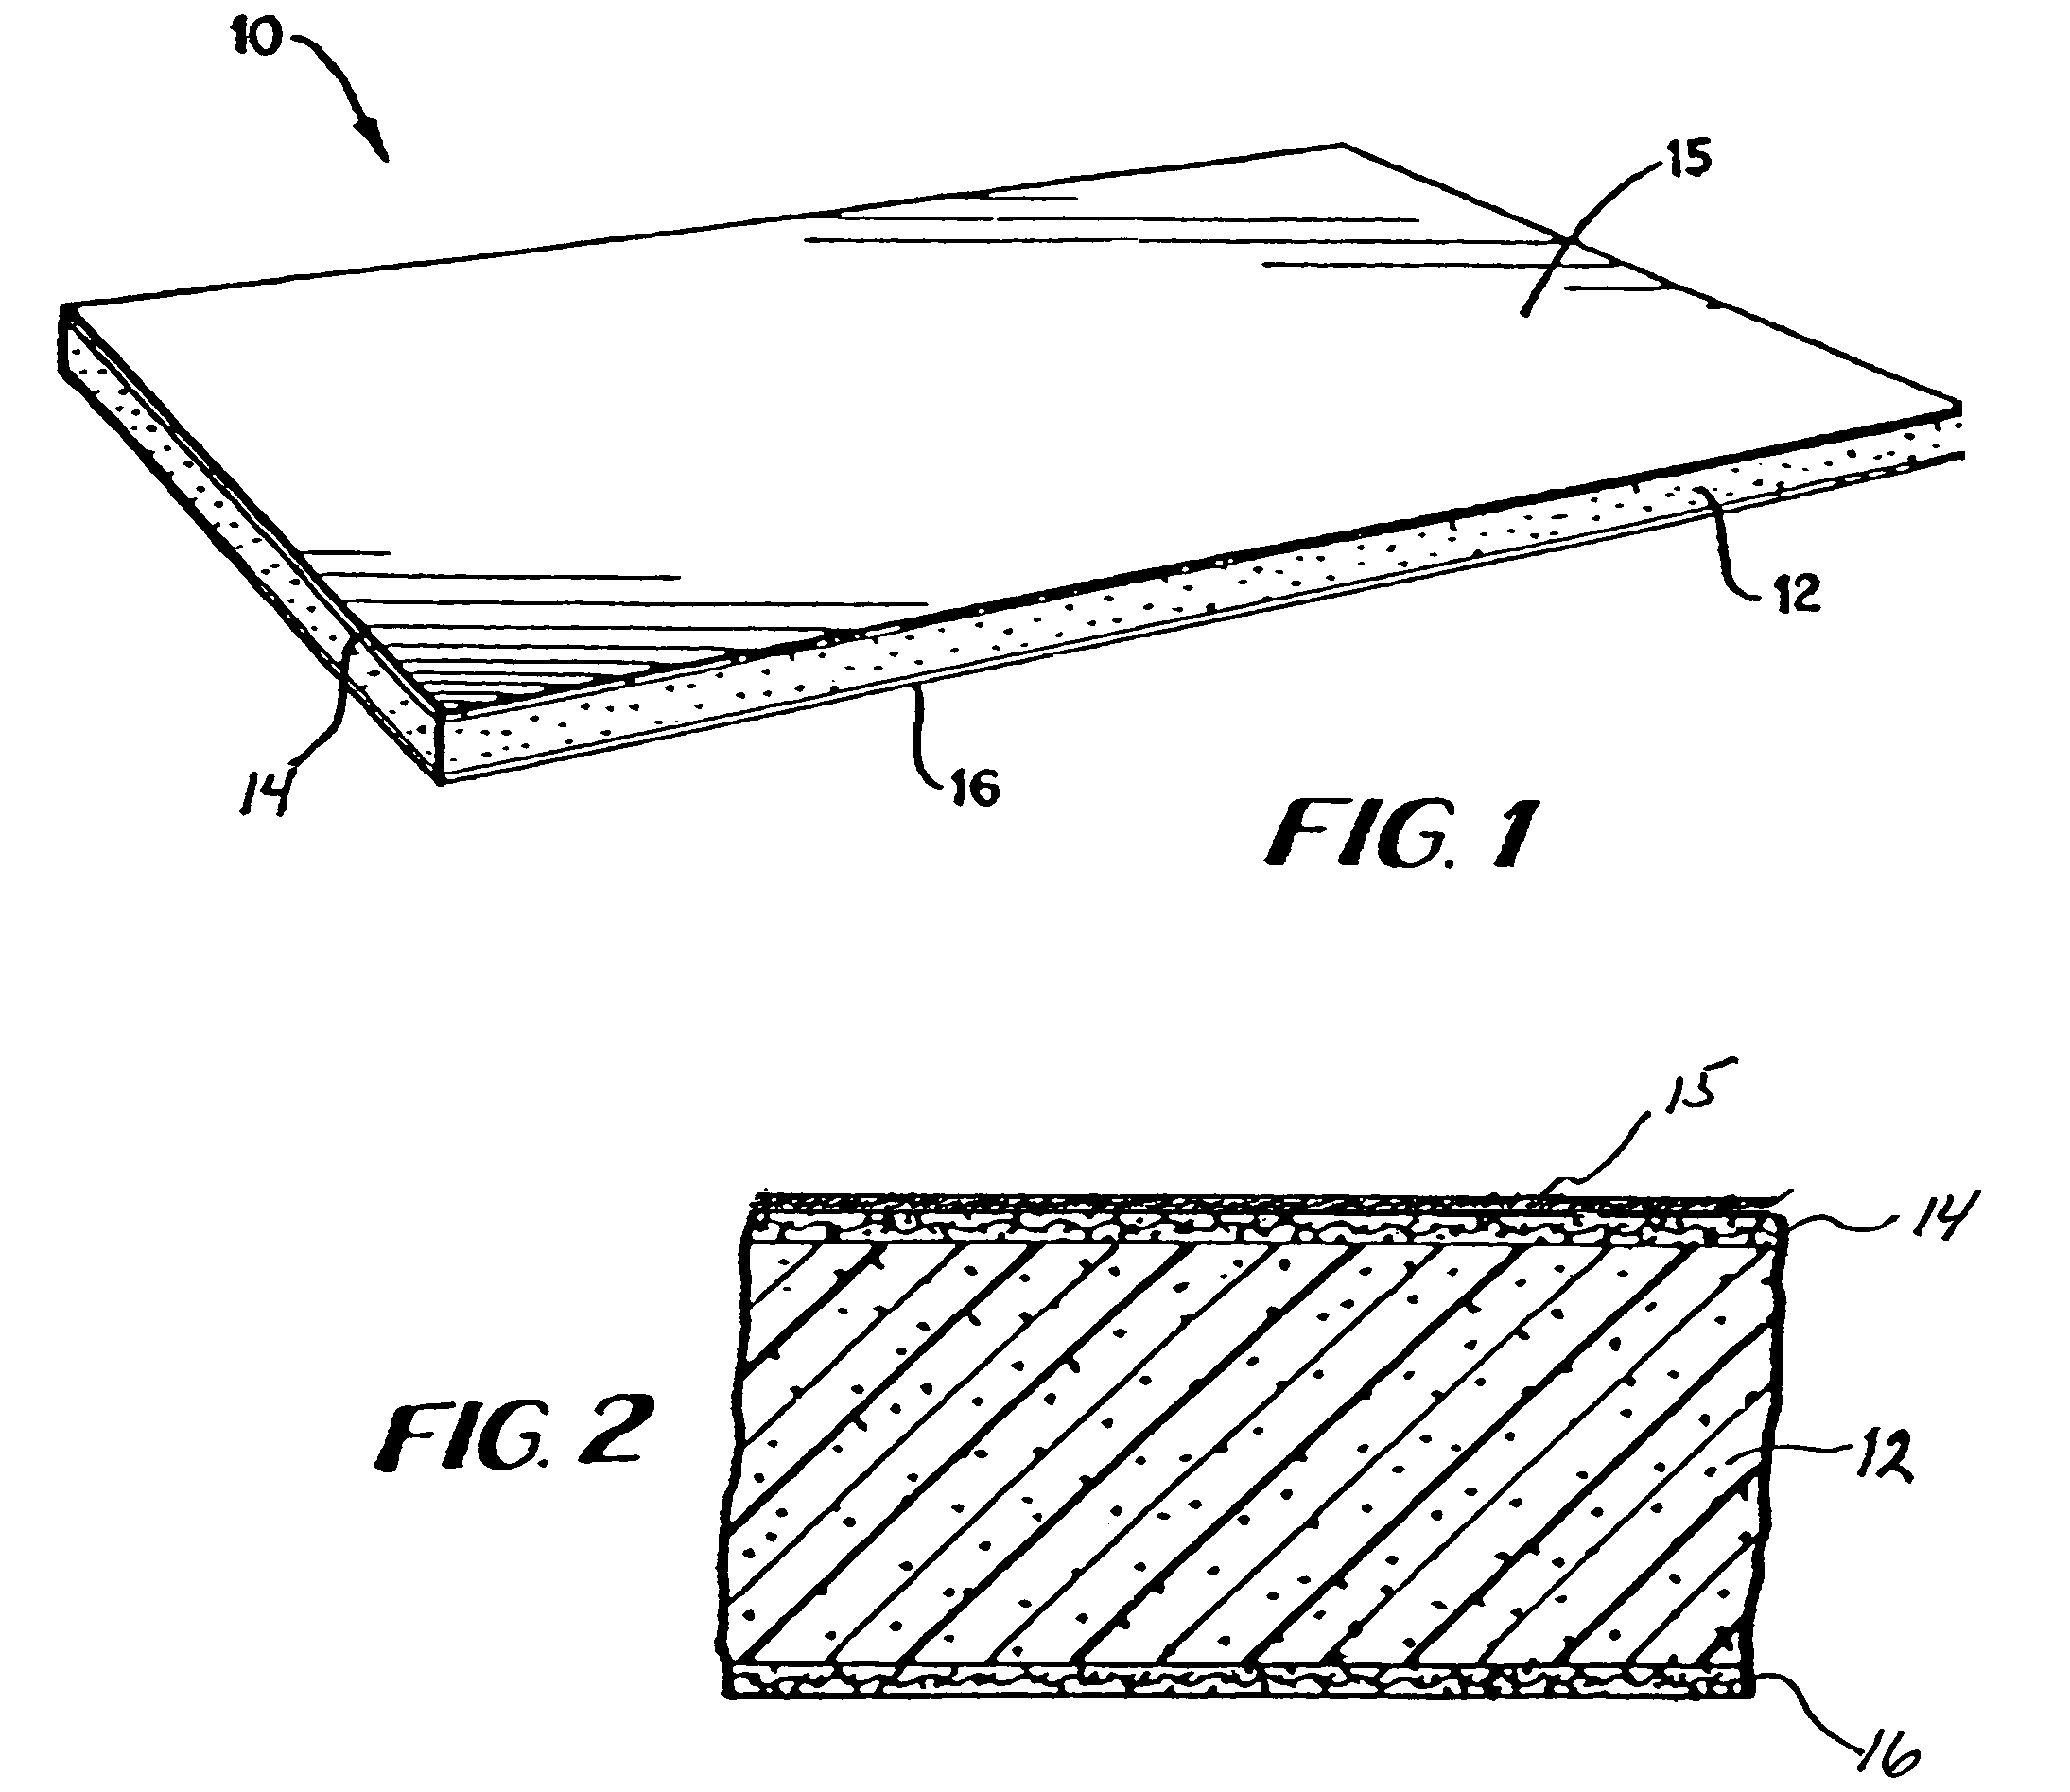 Gypsum panel having UV-cured moisture resistant coating and method for making the same